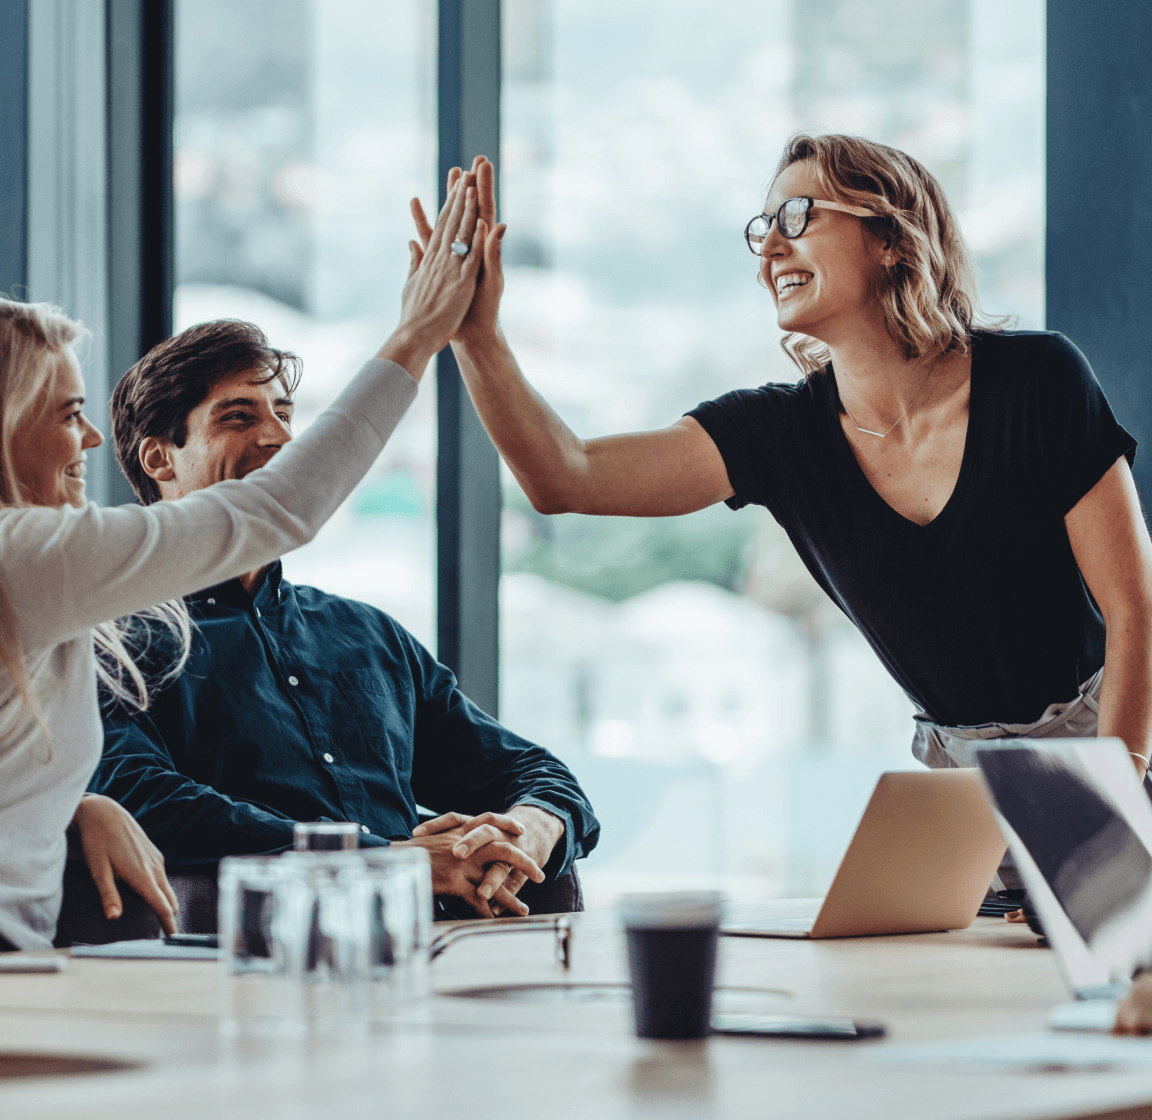 A group of people enthusiastically high-fiving each other in a meeting, showcasing a client-centric approach and tangible results.